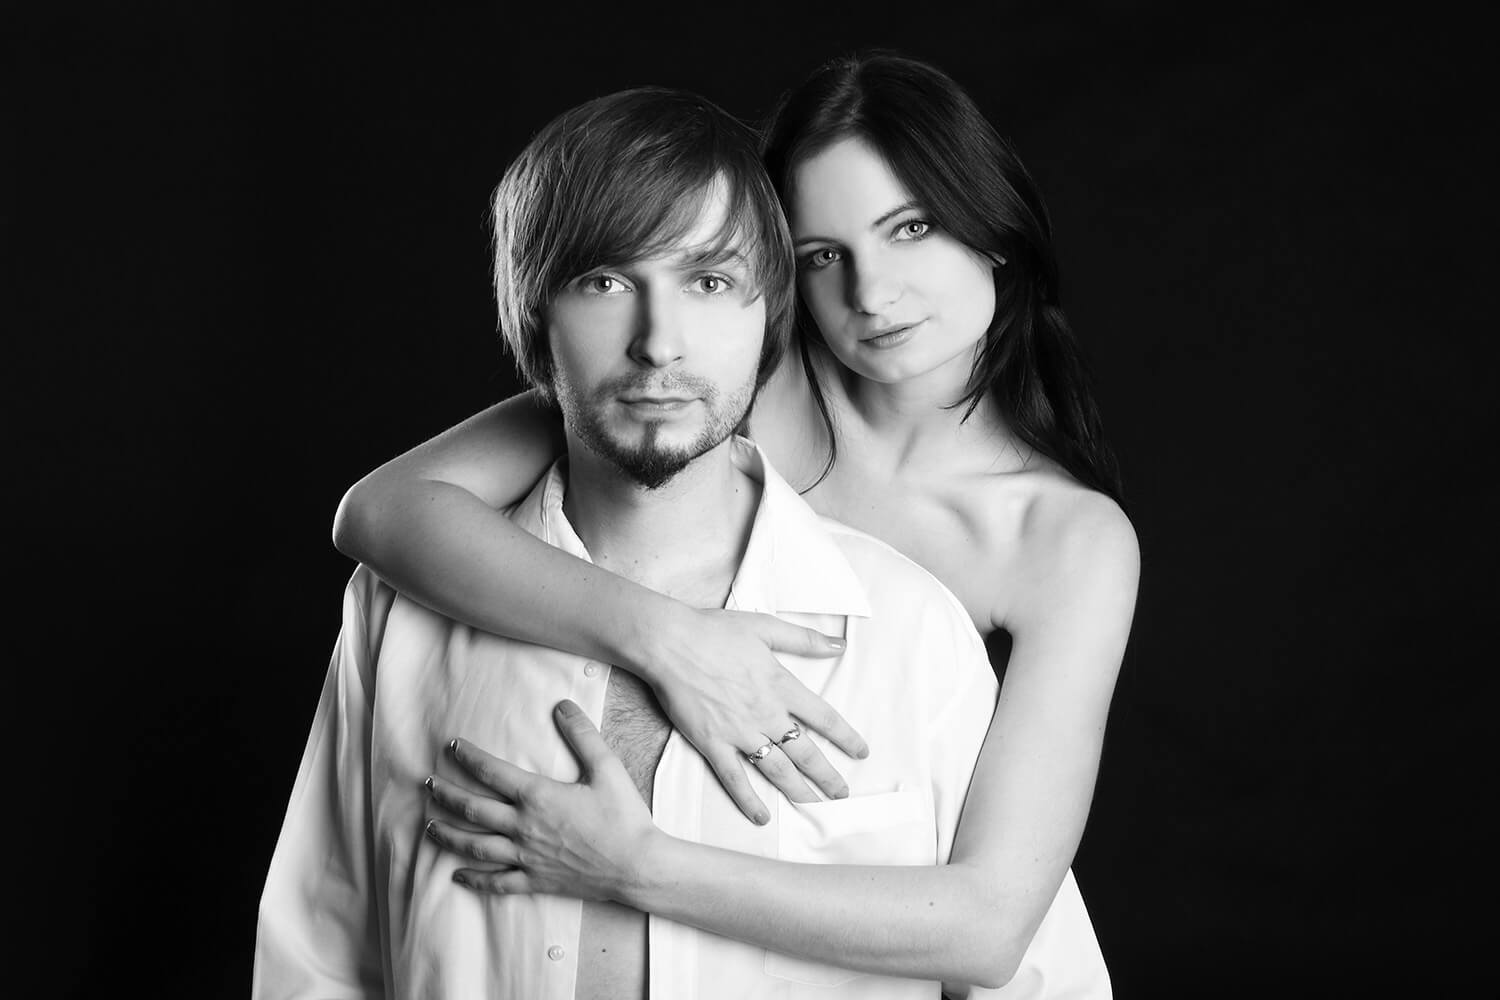 black and white couple photo of a woman embracing a man in a shirt on a dark background